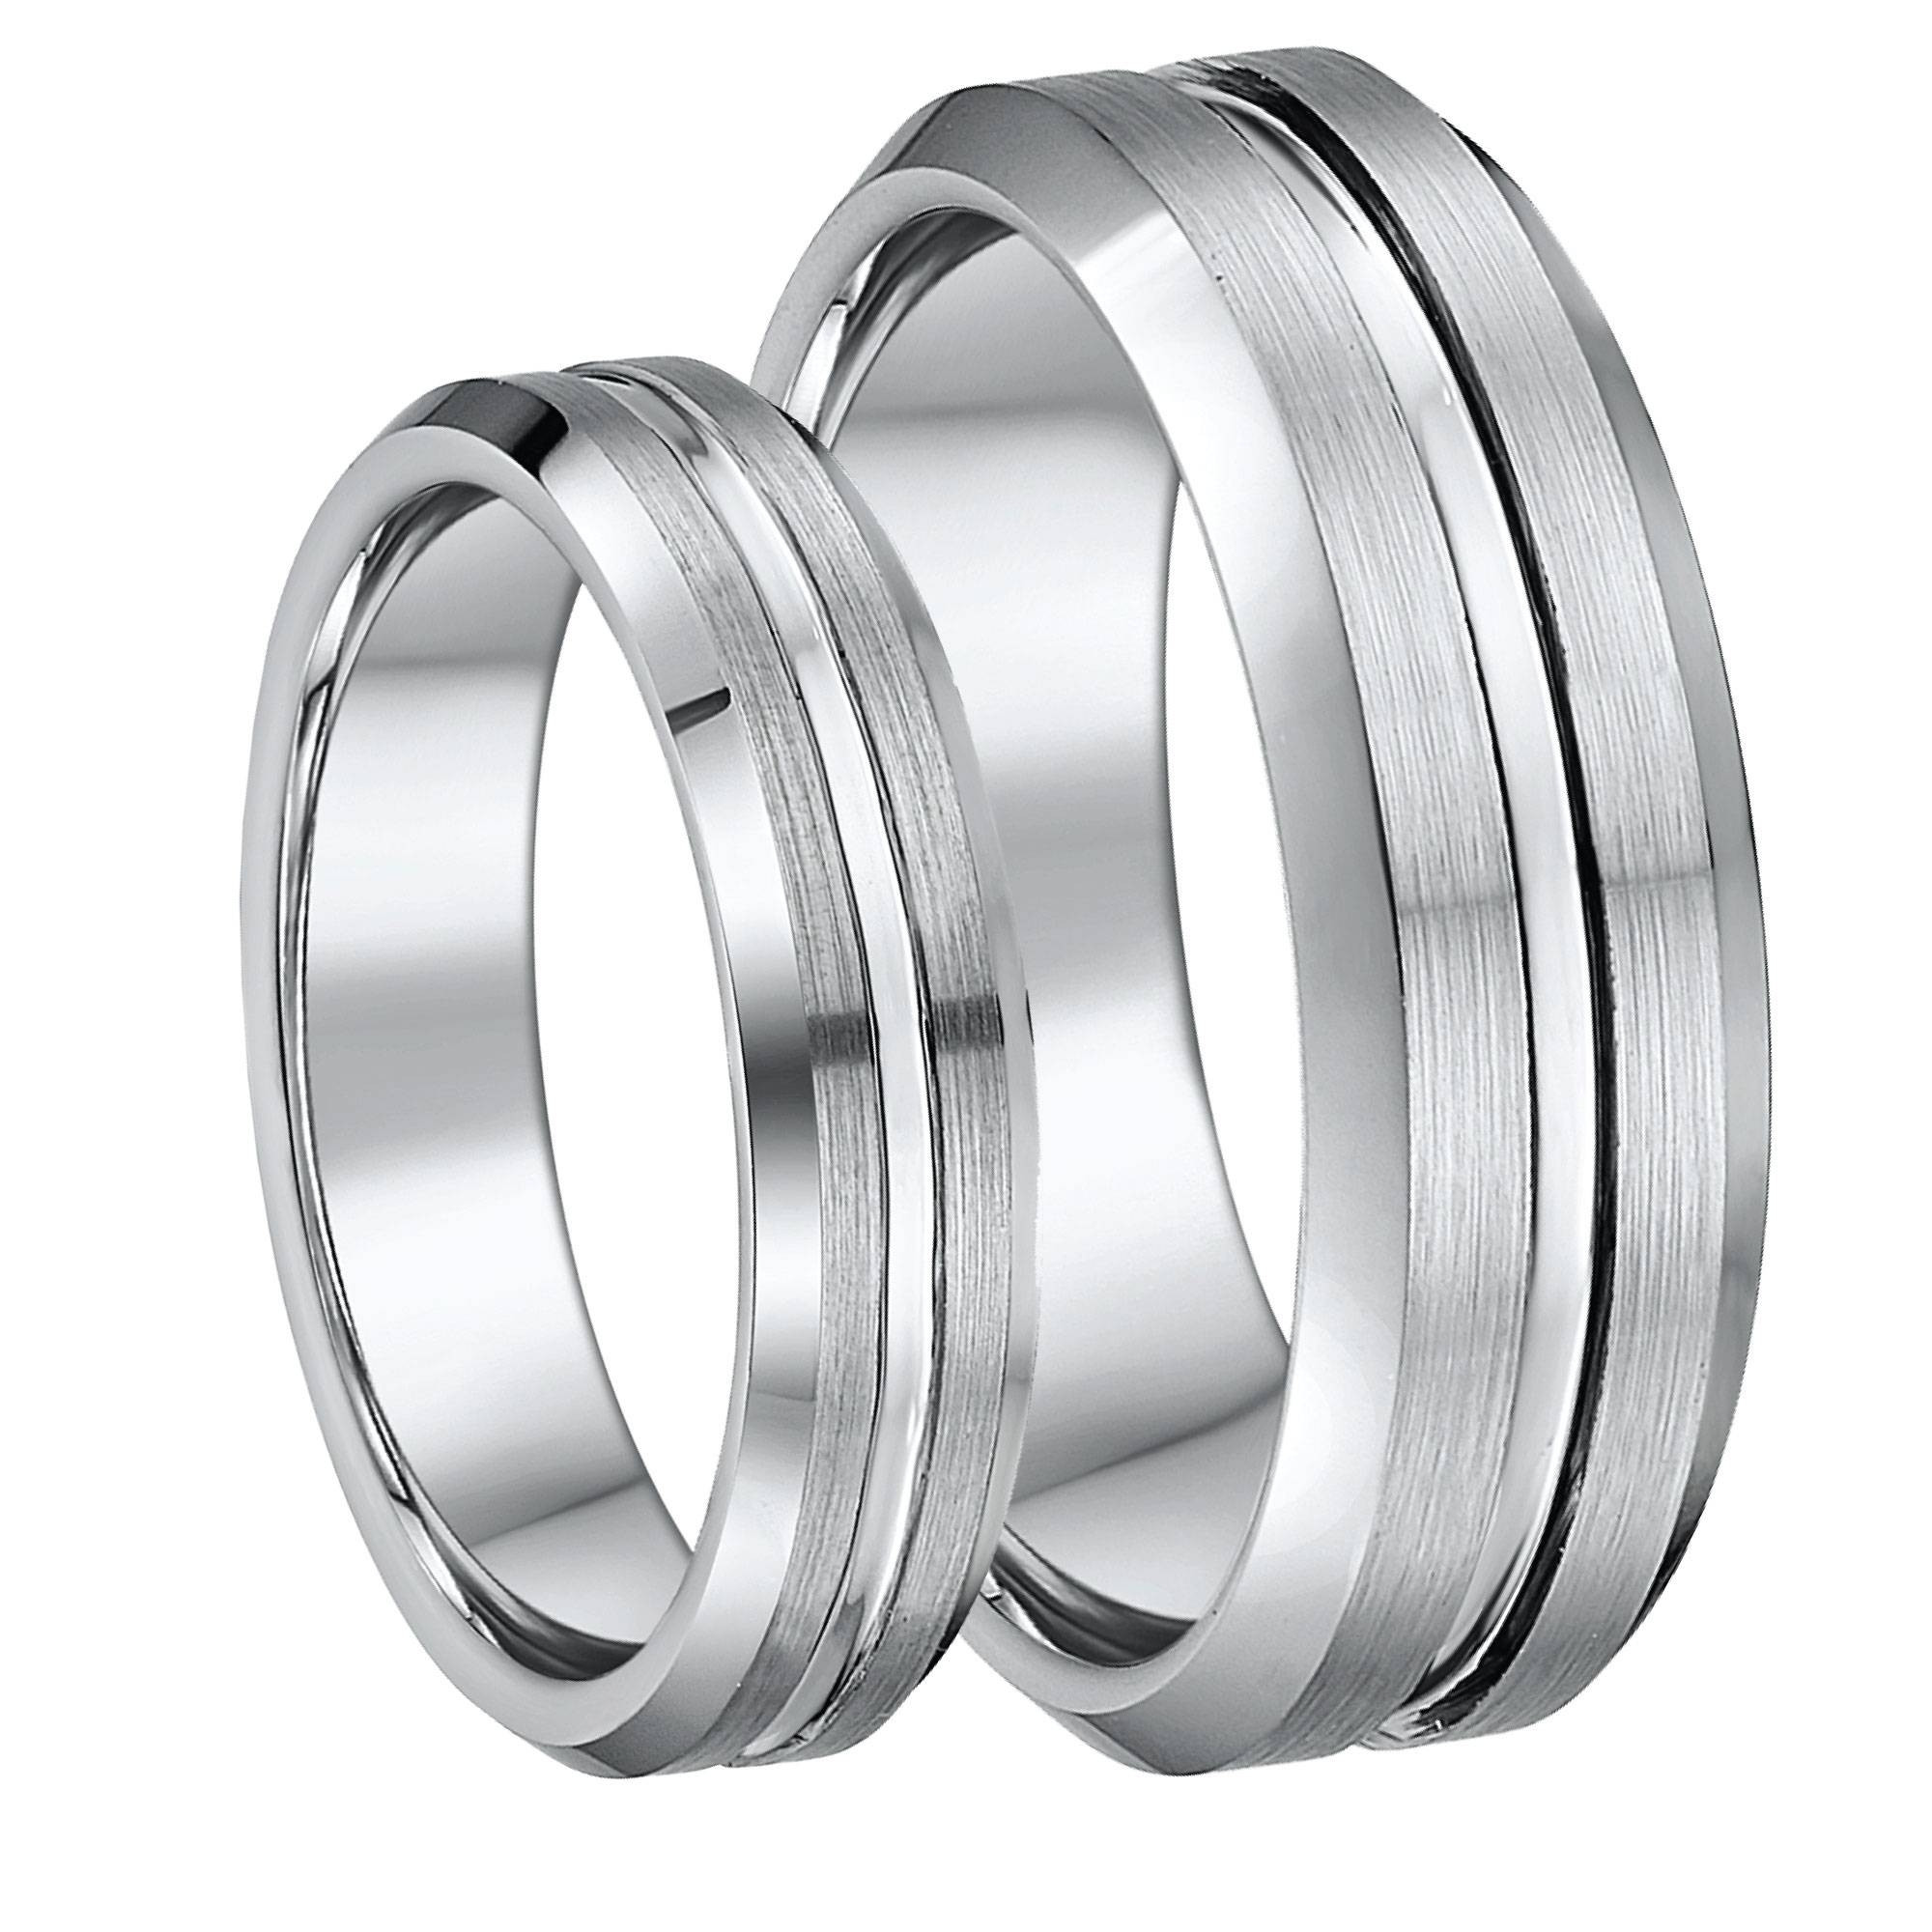 Tungsten Wedding Rings For Her
 2019 Latest Tungsten Wedding Bands Sets His And Hers